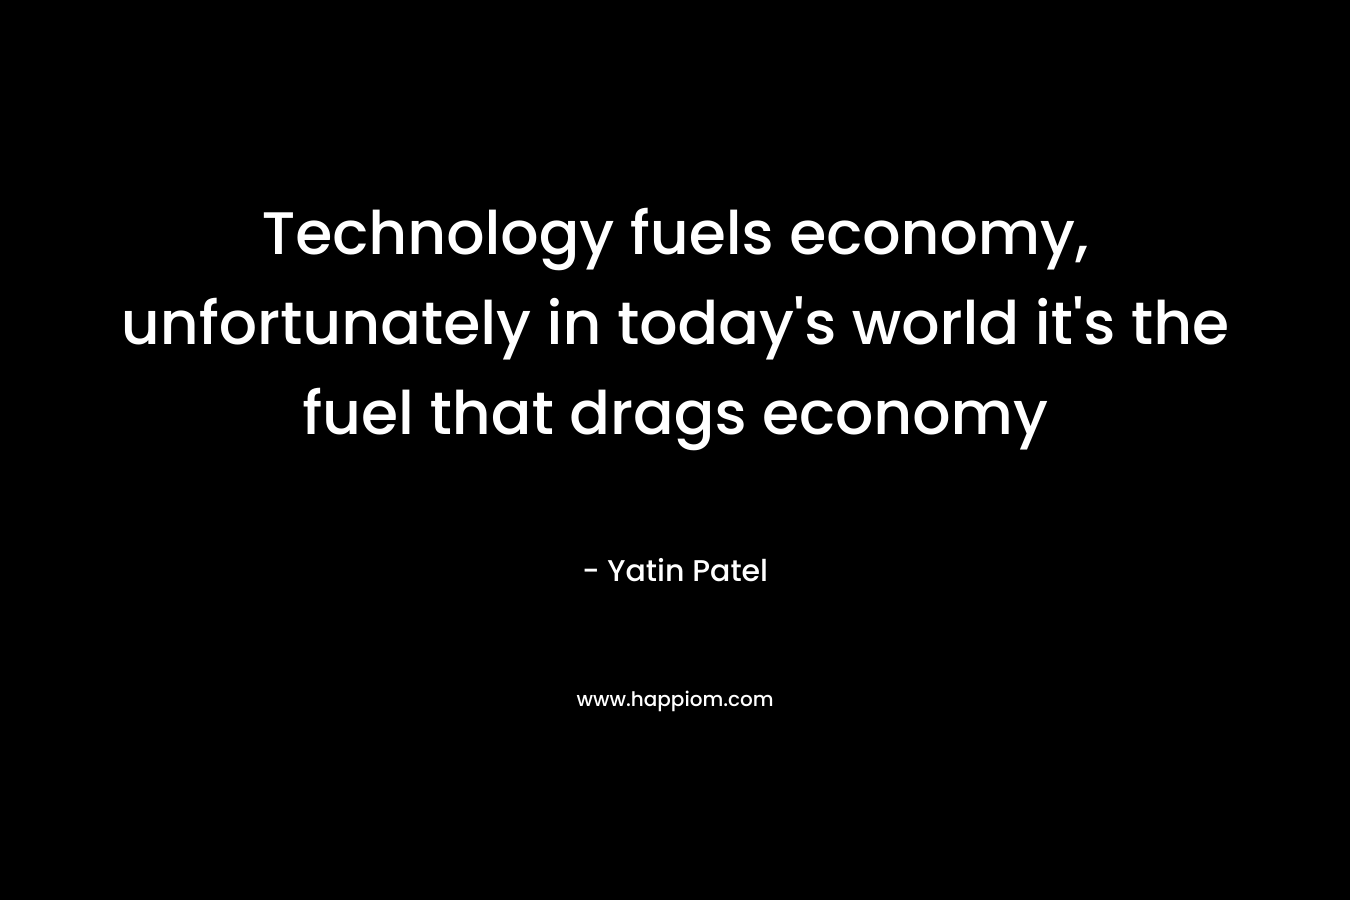 Technology fuels economy, unfortunately in today’s world it’s the fuel that drags economy – Yatin Patel